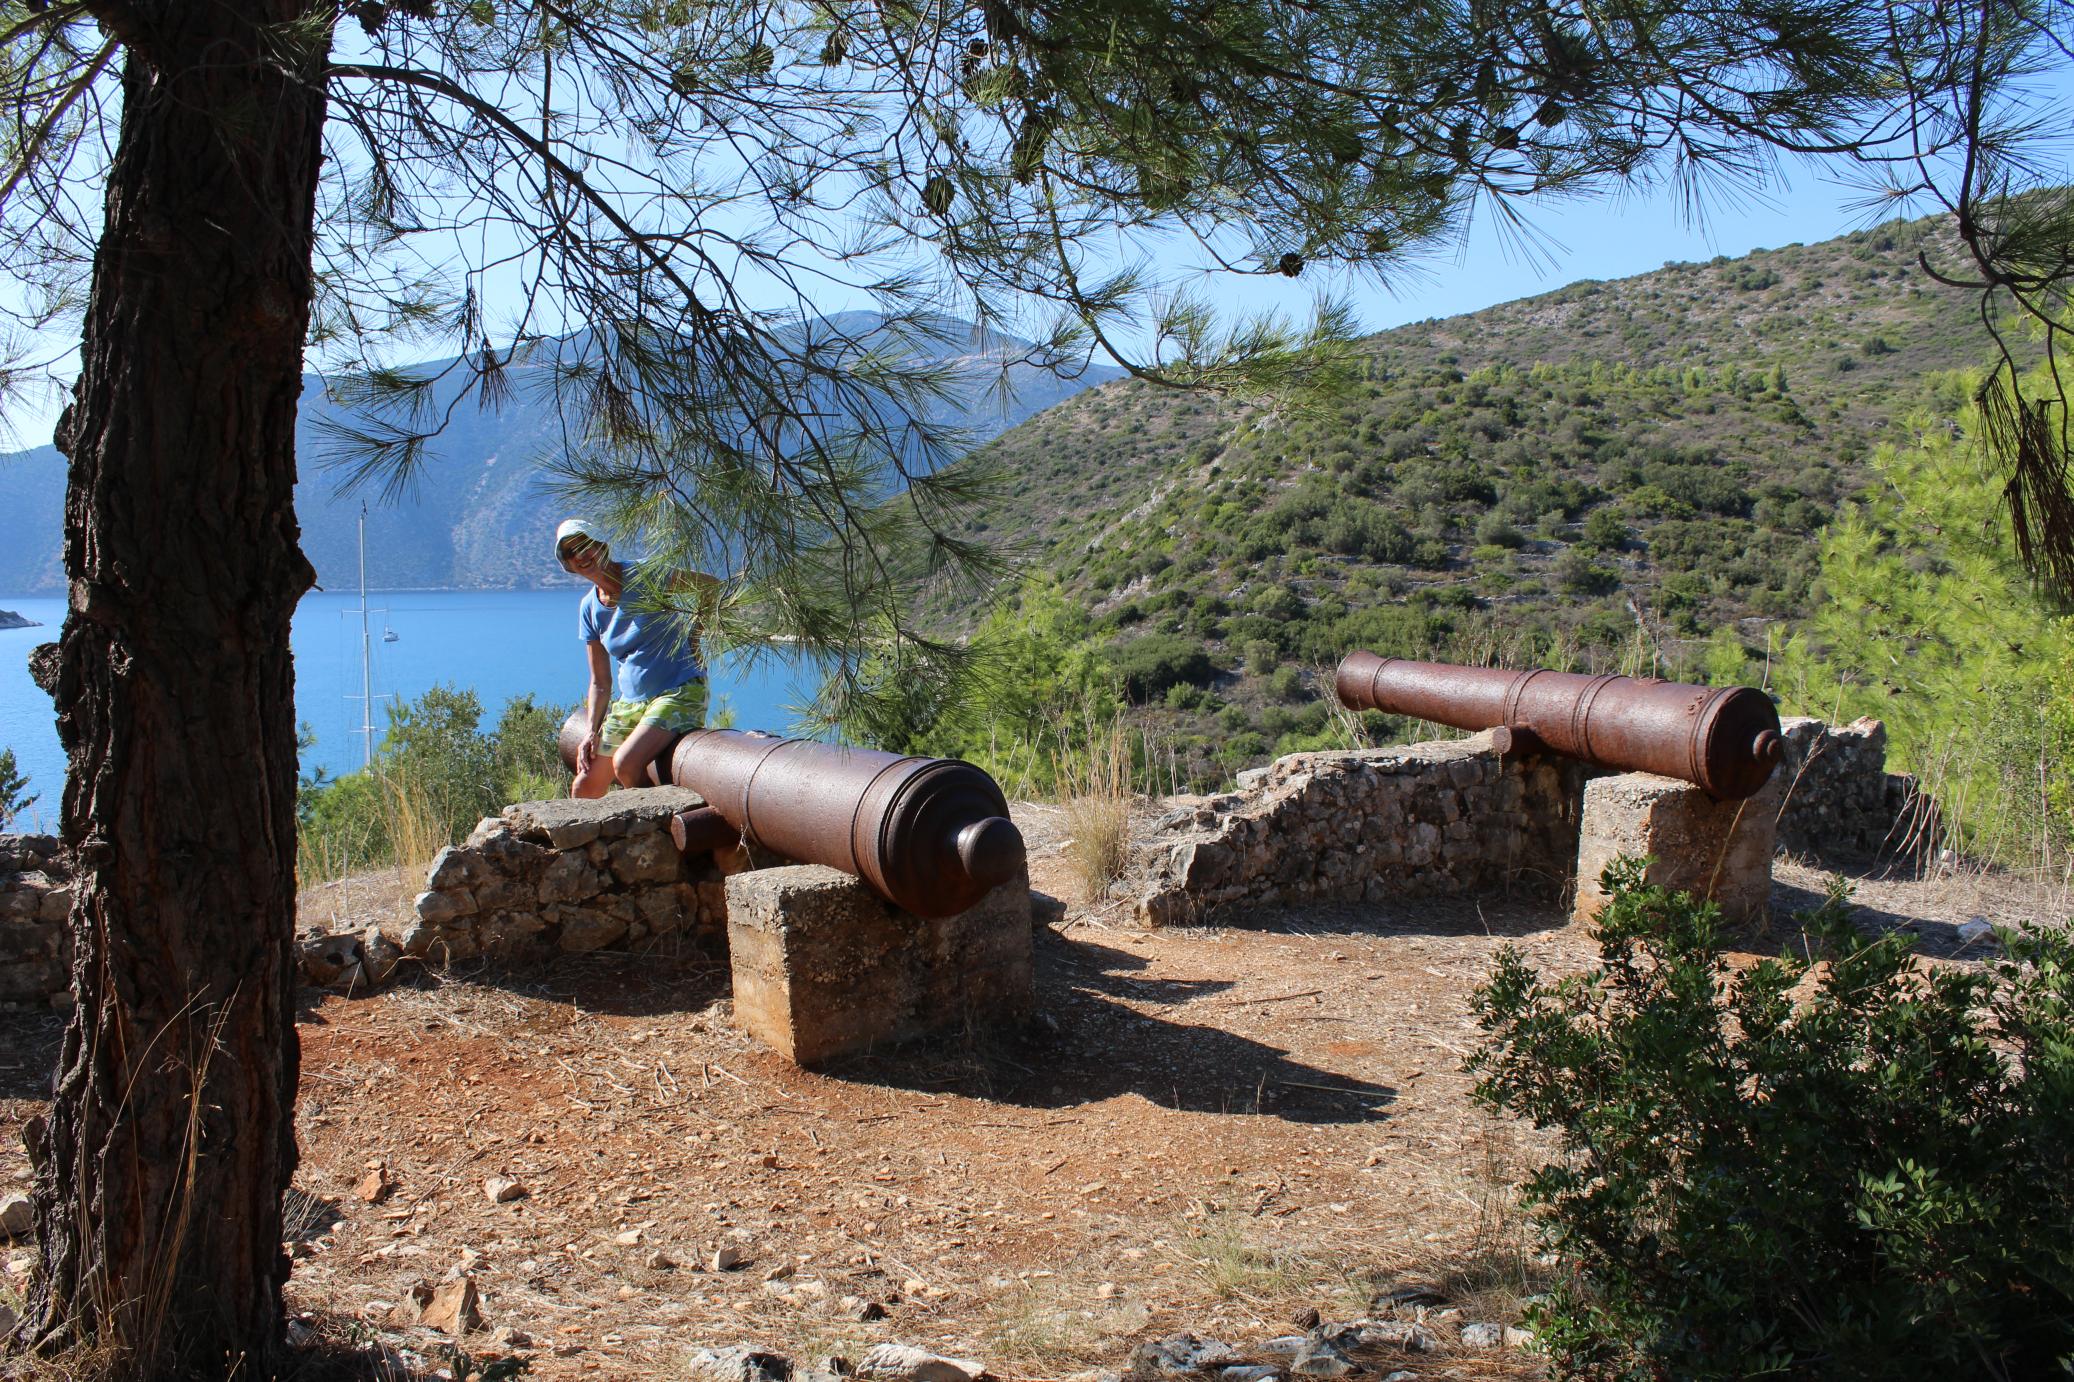 Venetian Cannons at Vathy, Ithaca, 12th Sept 2018.